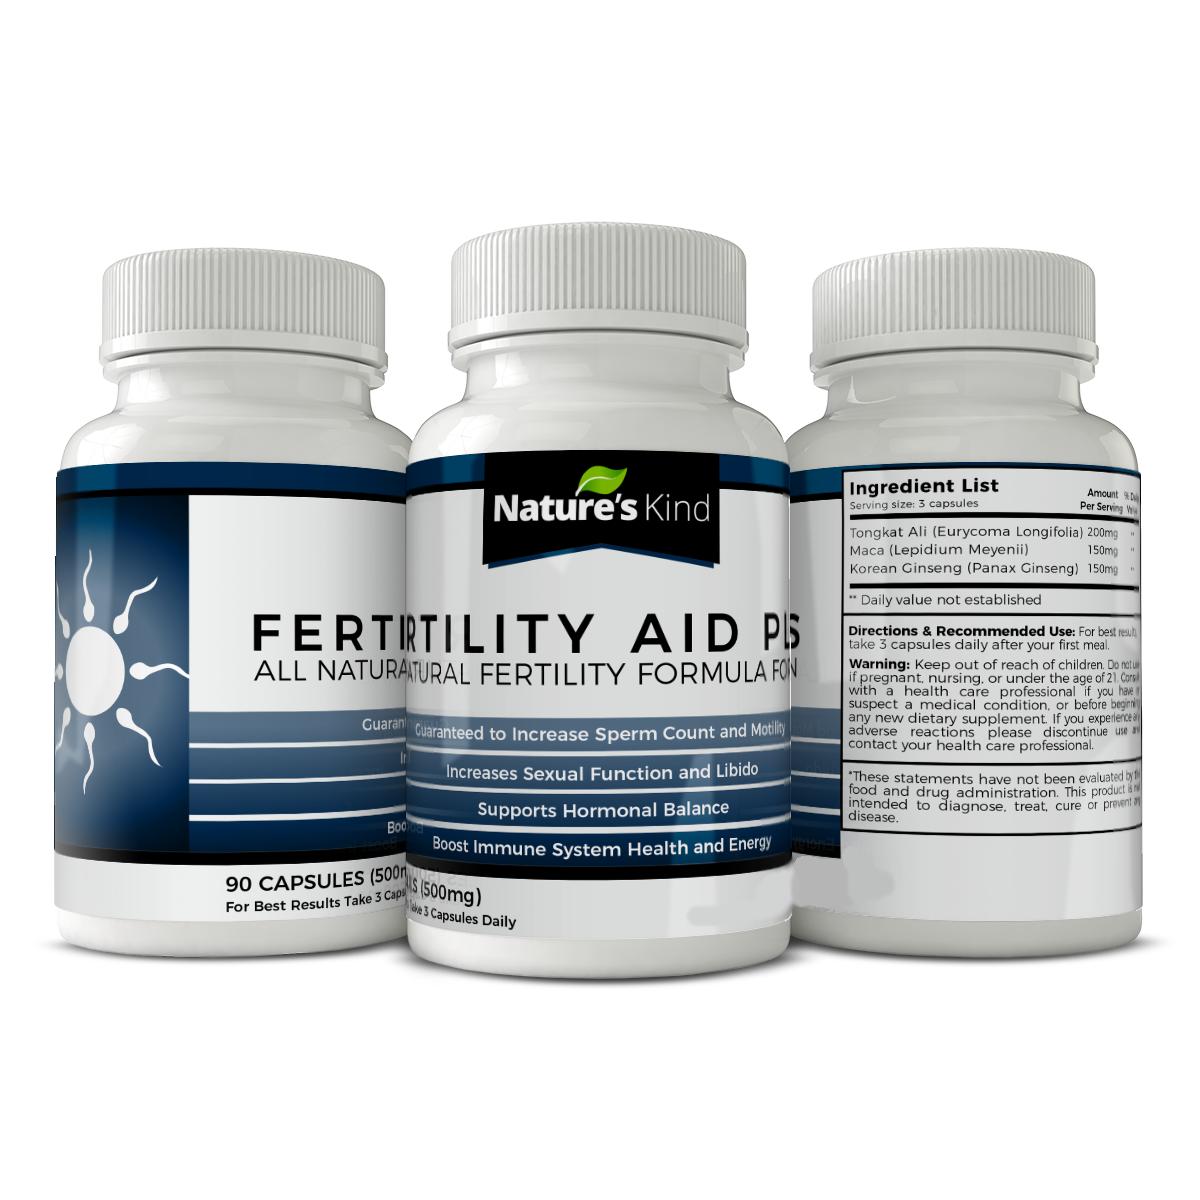 Fertility Aid Plus for Men - FerteeAid Guaranteed to Increase Sperm Count and Motility in Males